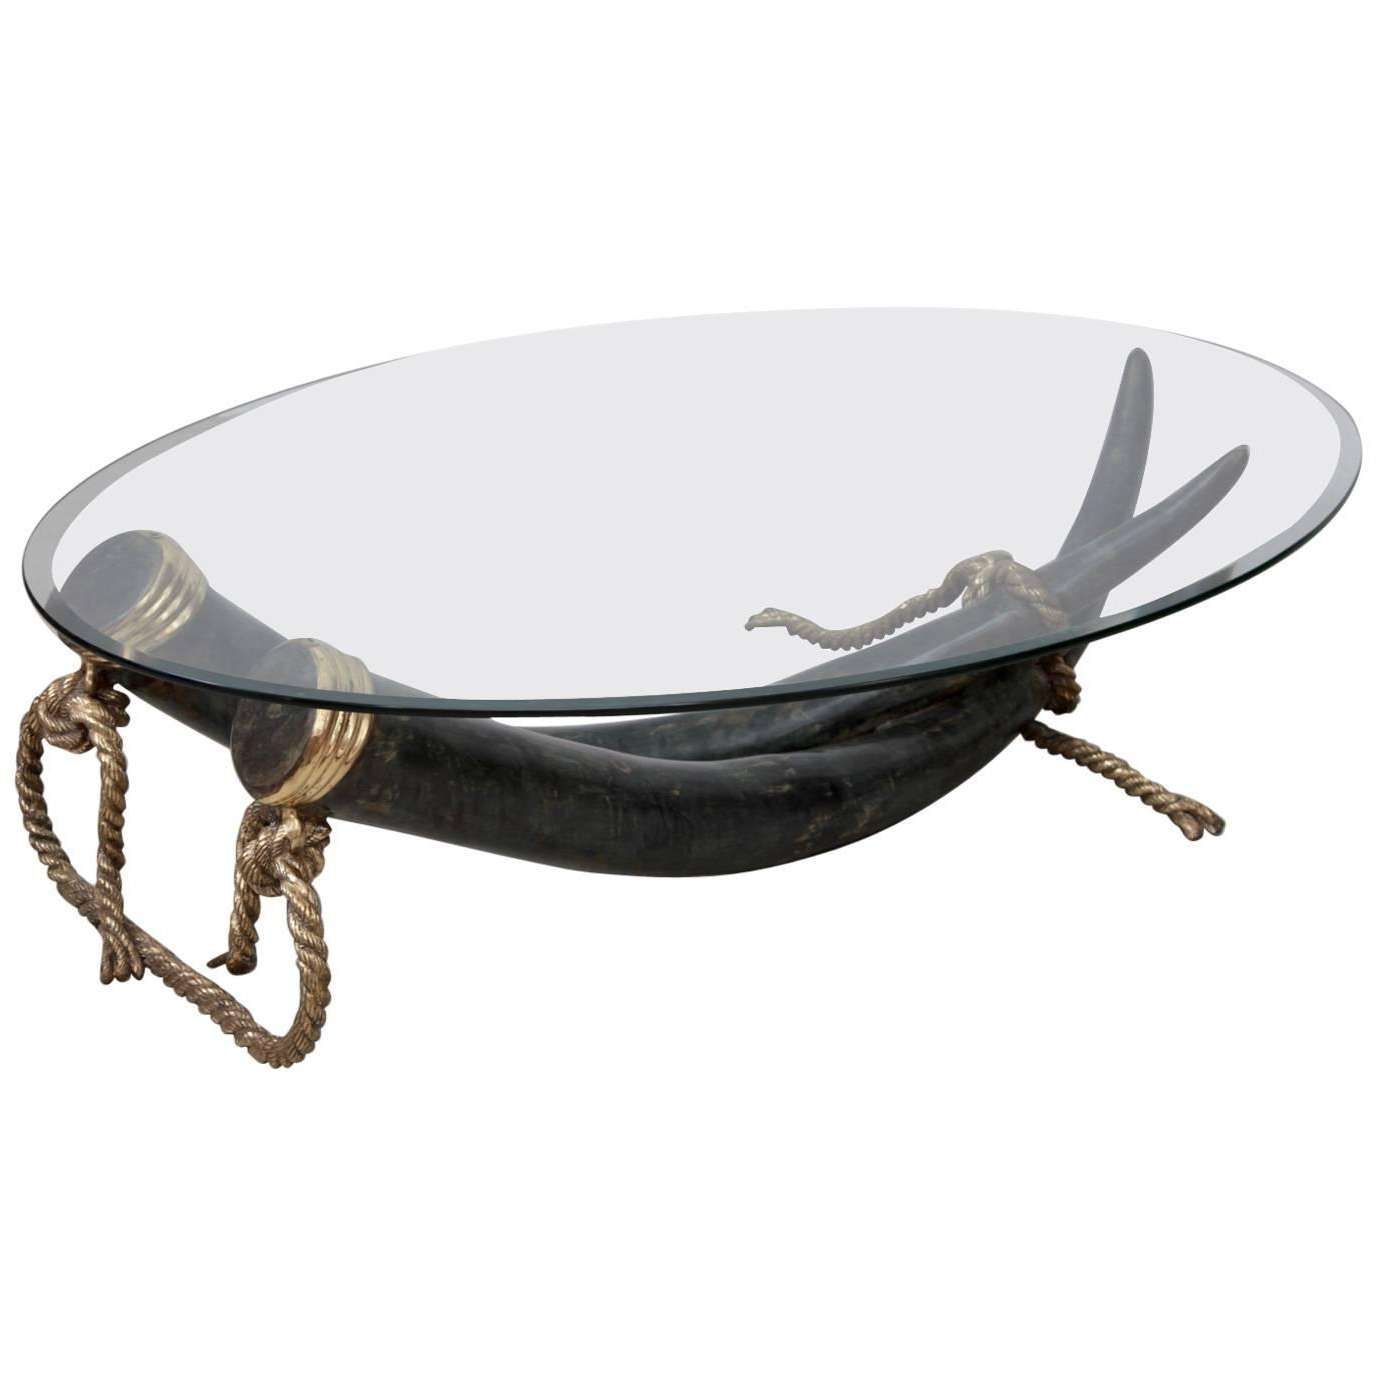 Large Glass And Brass Elephant Tusk Base Coffee Tablevalenti Throughout Fashionable Elephant Glass Coffee Tables (View 11 of 20)